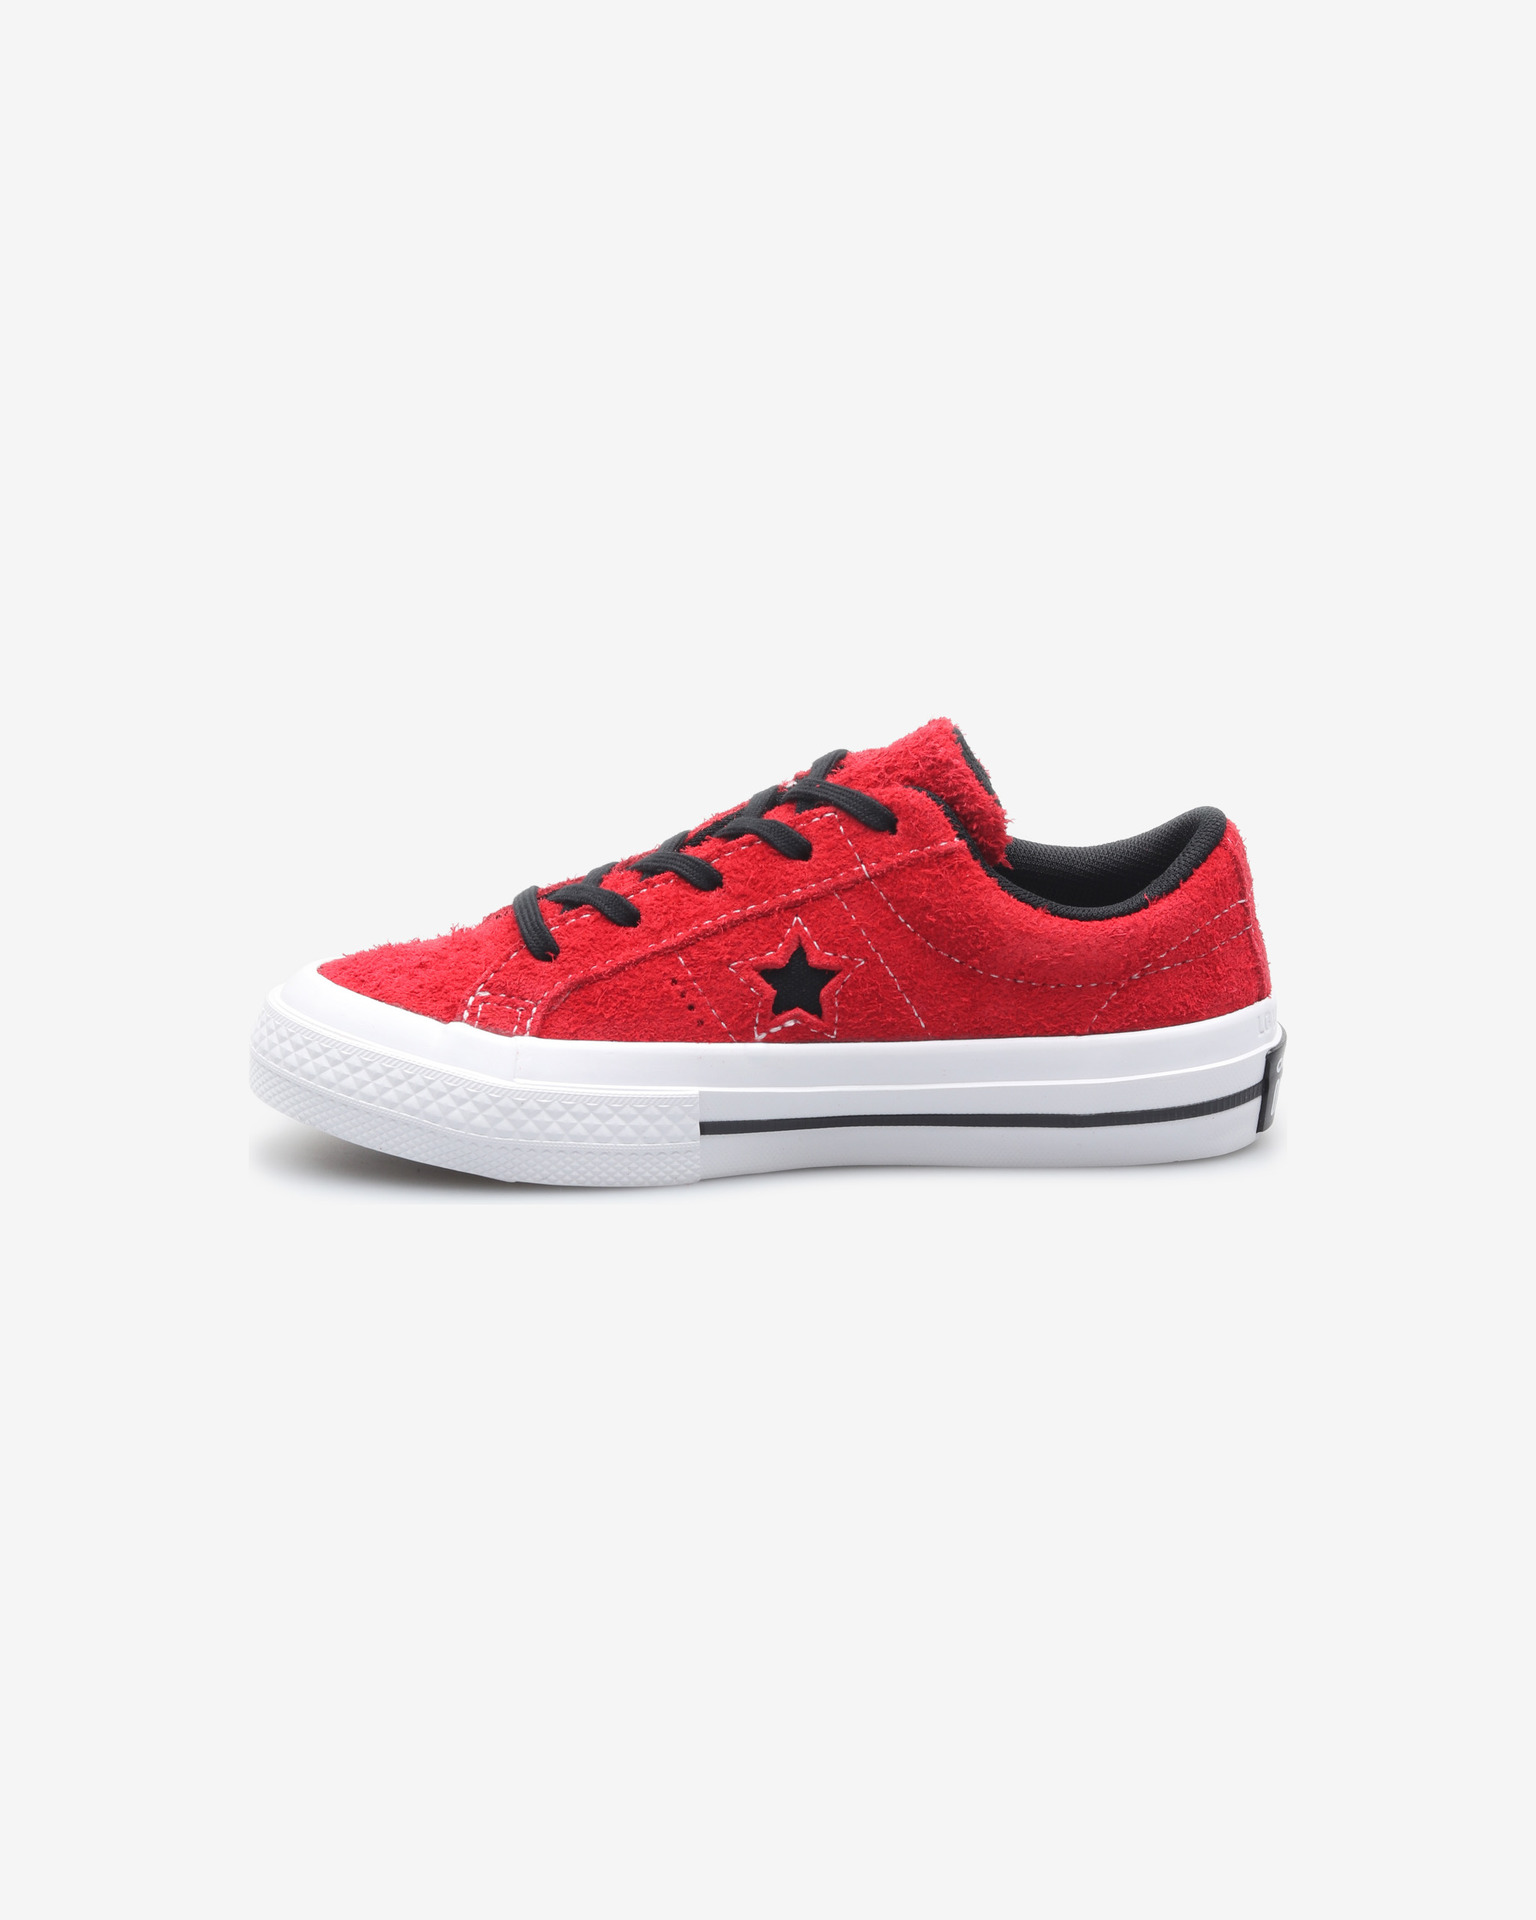 converse one star kids shoes